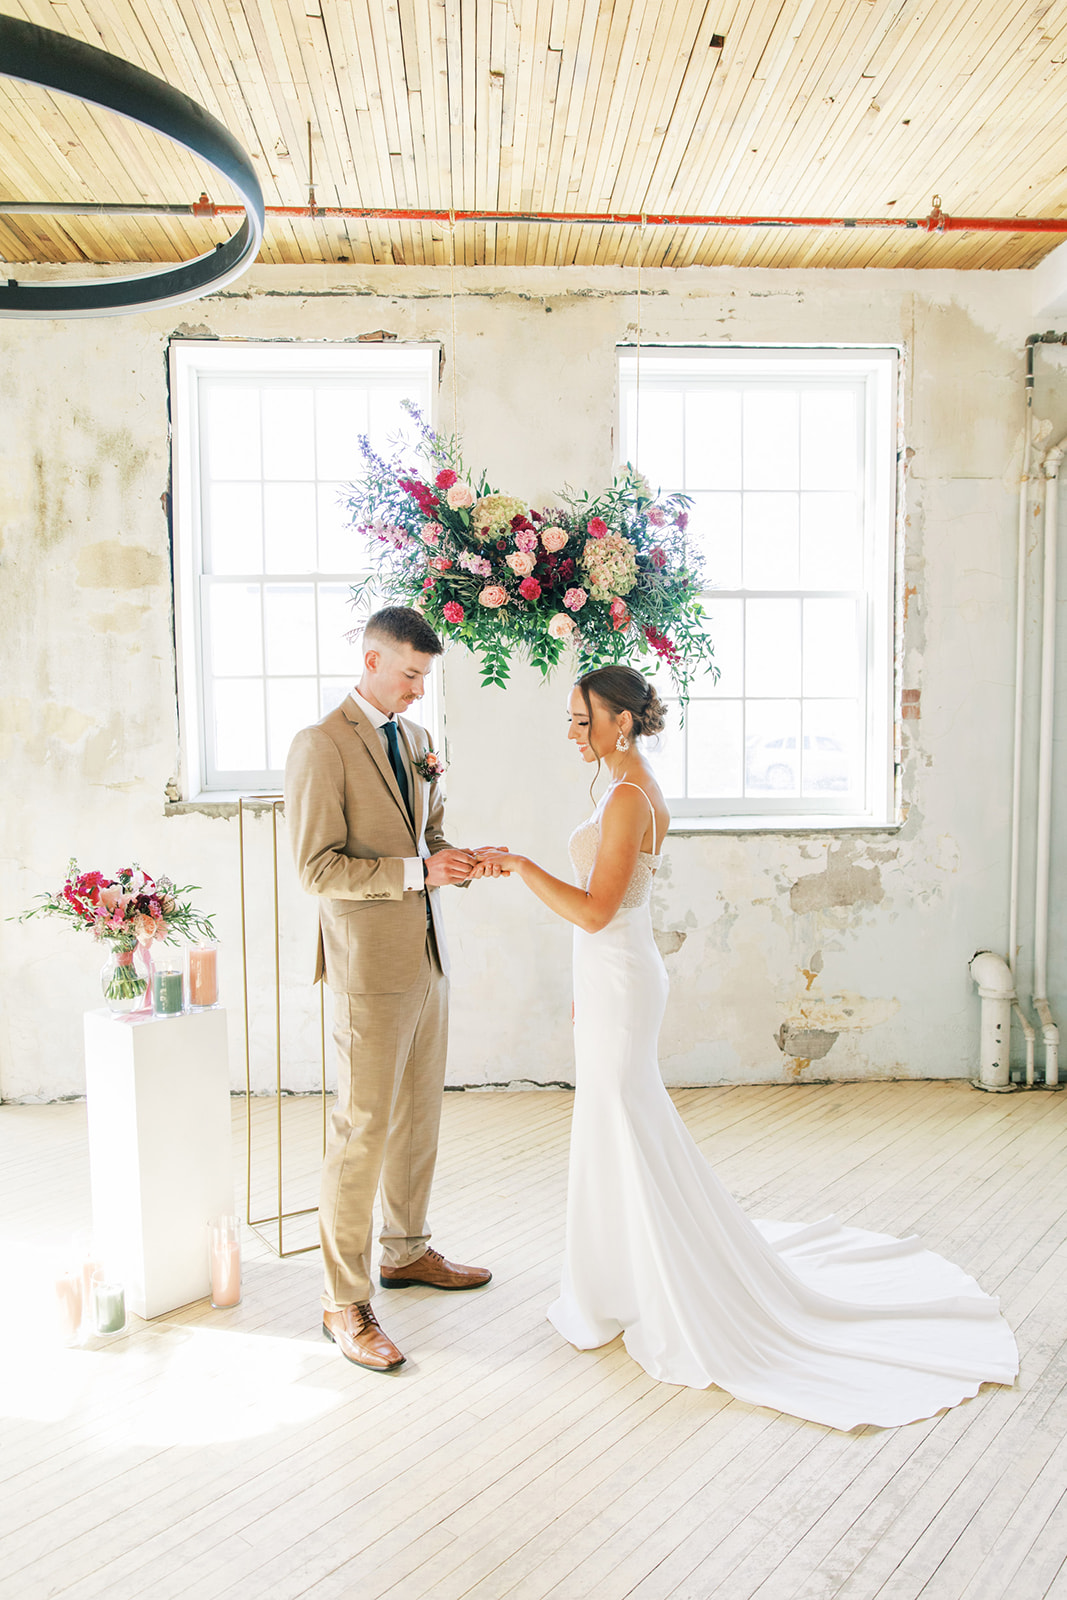 Couple during romantic, vintage inspired wedding ceremony, featuring hanging florals created by Rose & Vine.